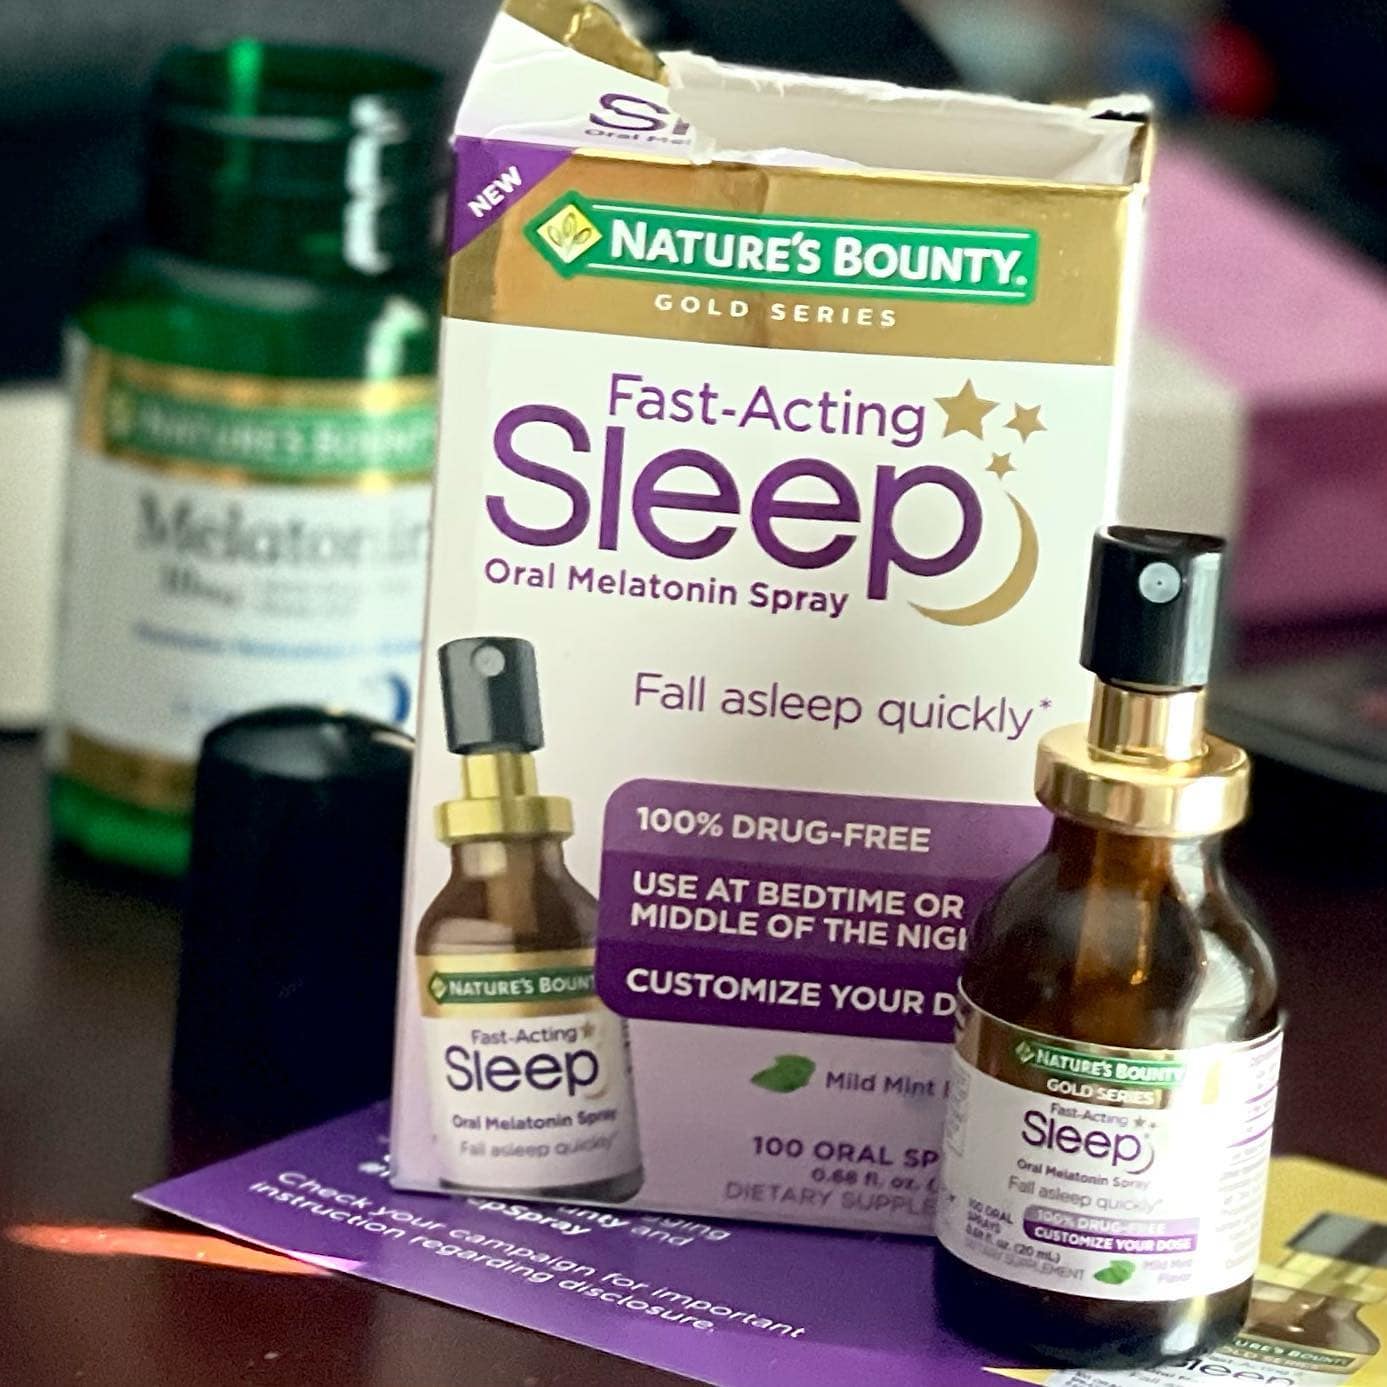 I usually take a 10 MG pill of melatonin every night. I have been using only 4 sprays of the new #naturesbounty Fast Acting Sleep Spray (which is equal to 2MG) and I am able to fall asleep! Plus I love the idea if I wake up in the middle of the night I can take one or two sprays to help doze off again. 💤

#complimentary #bettersleep #NBSleepSpray @Influenster @naturesbounty